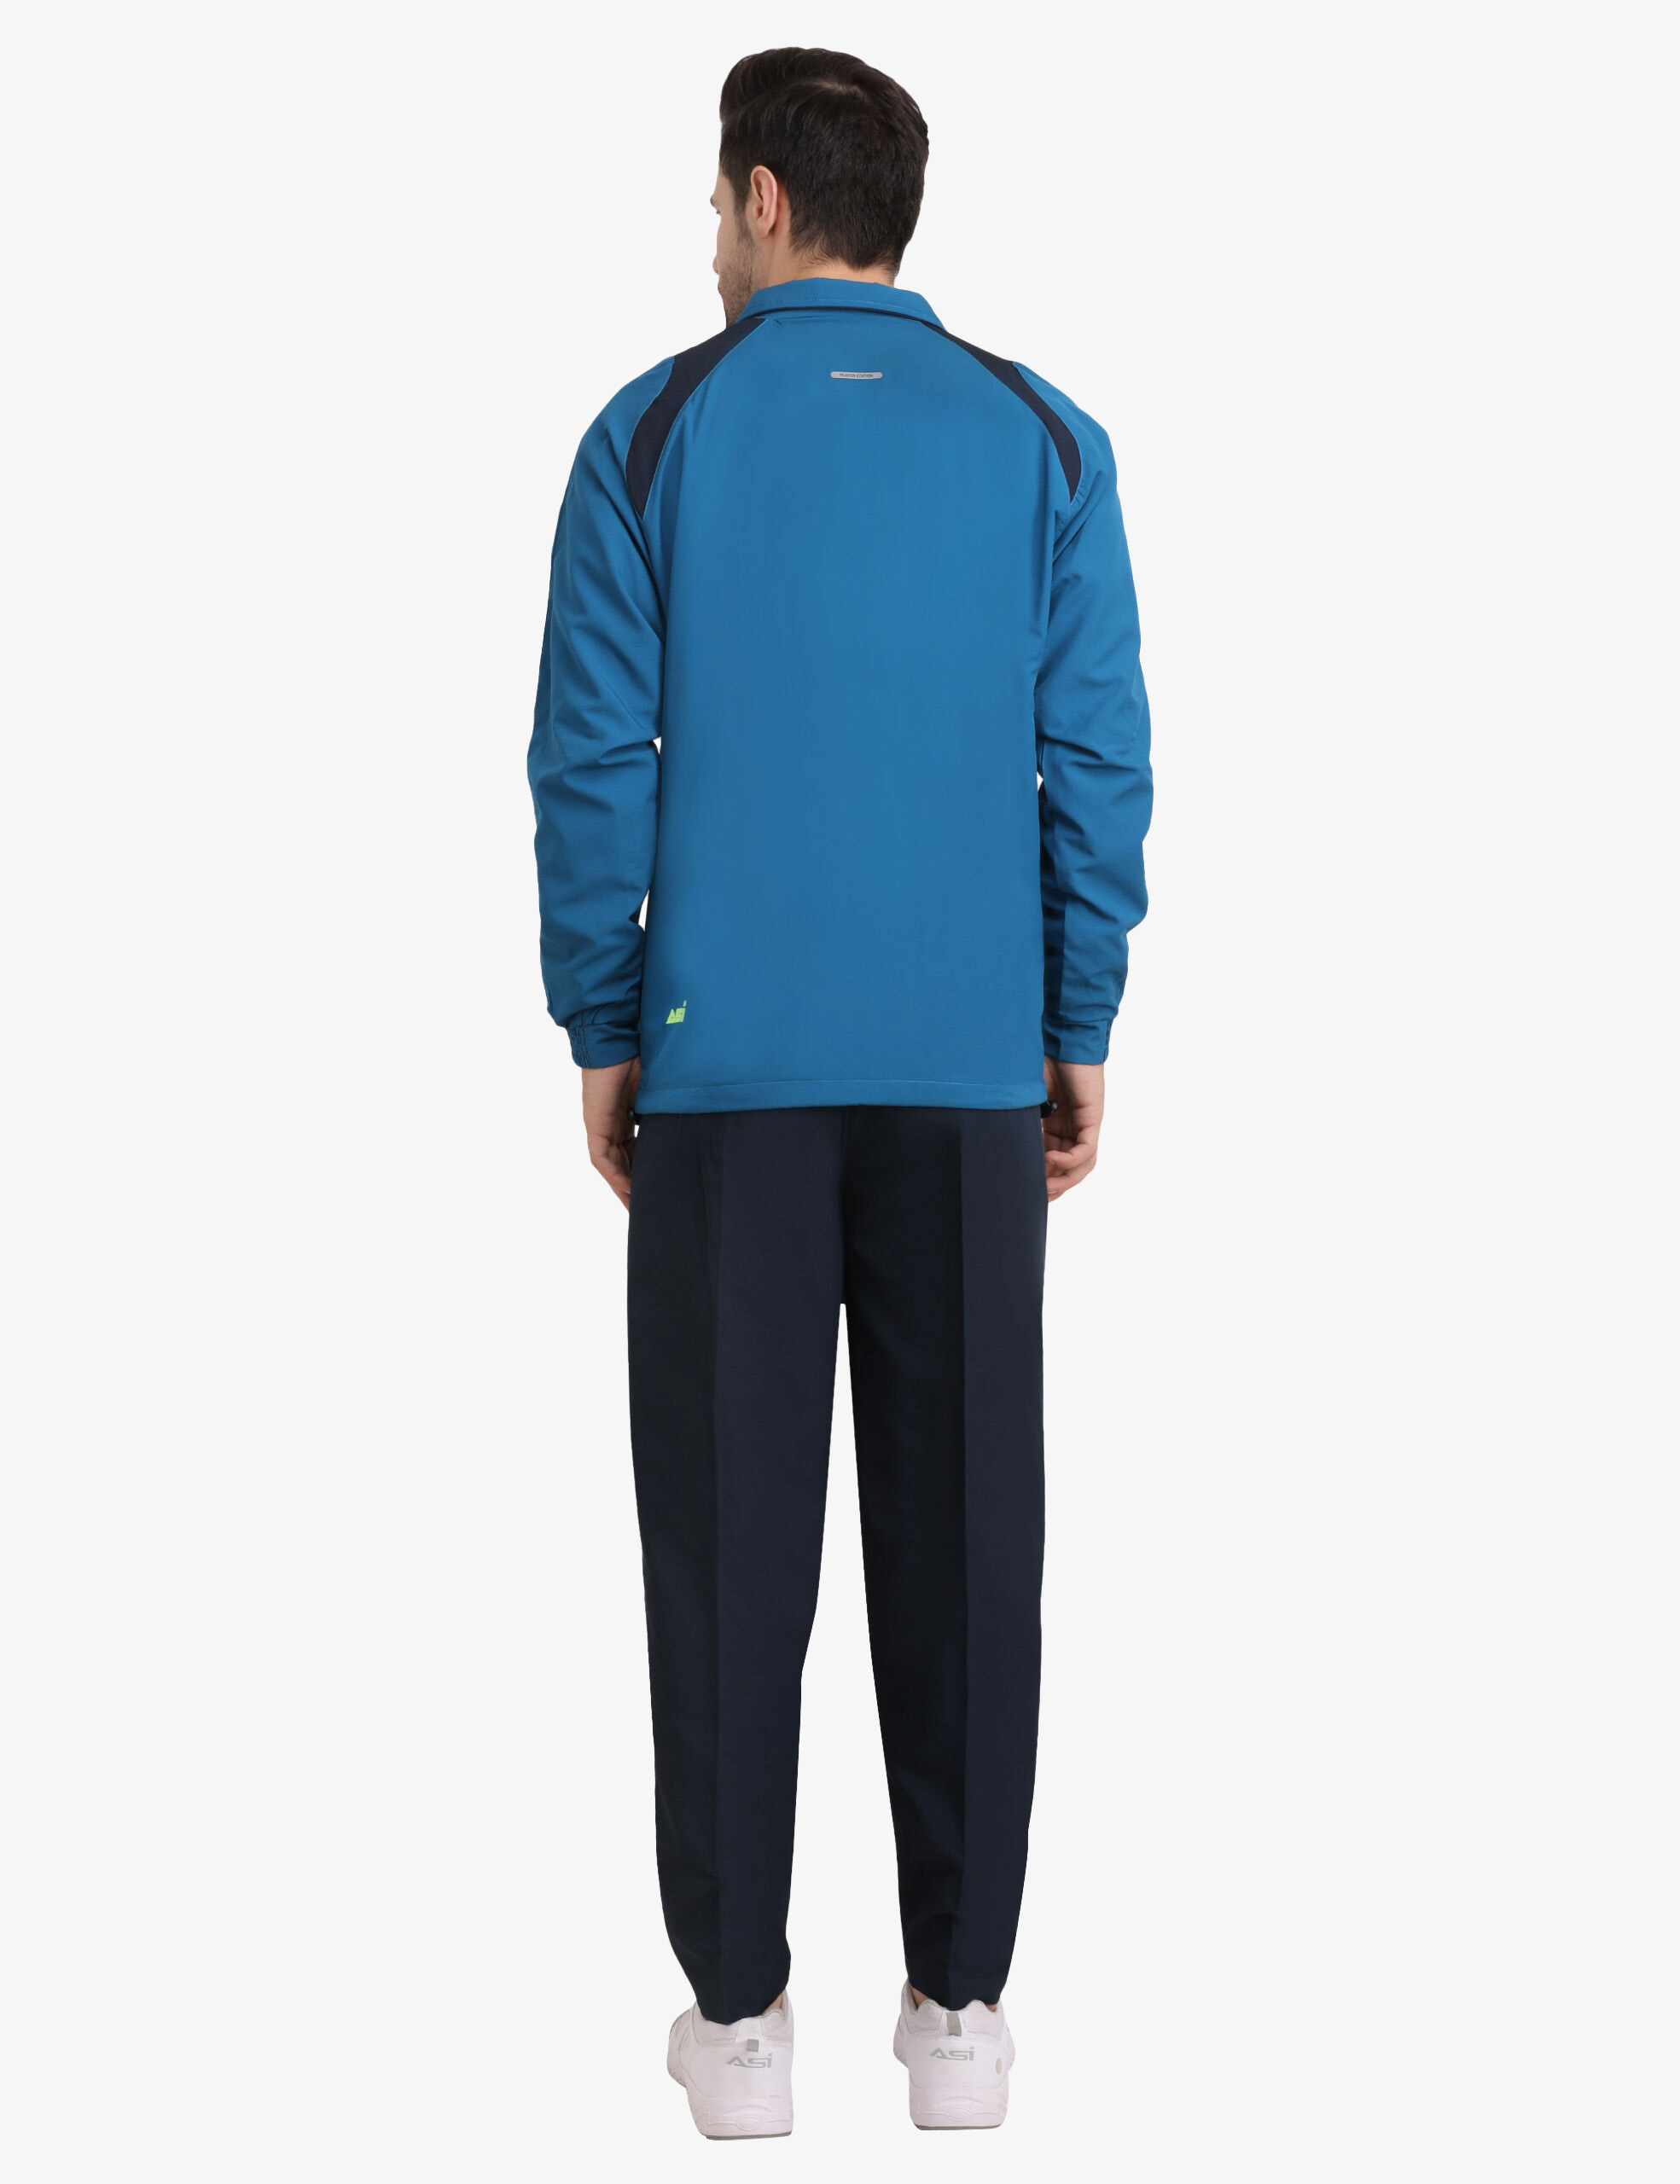 ASI - ZUMA Air Force Track Suit for Men - Anand Sports Industries